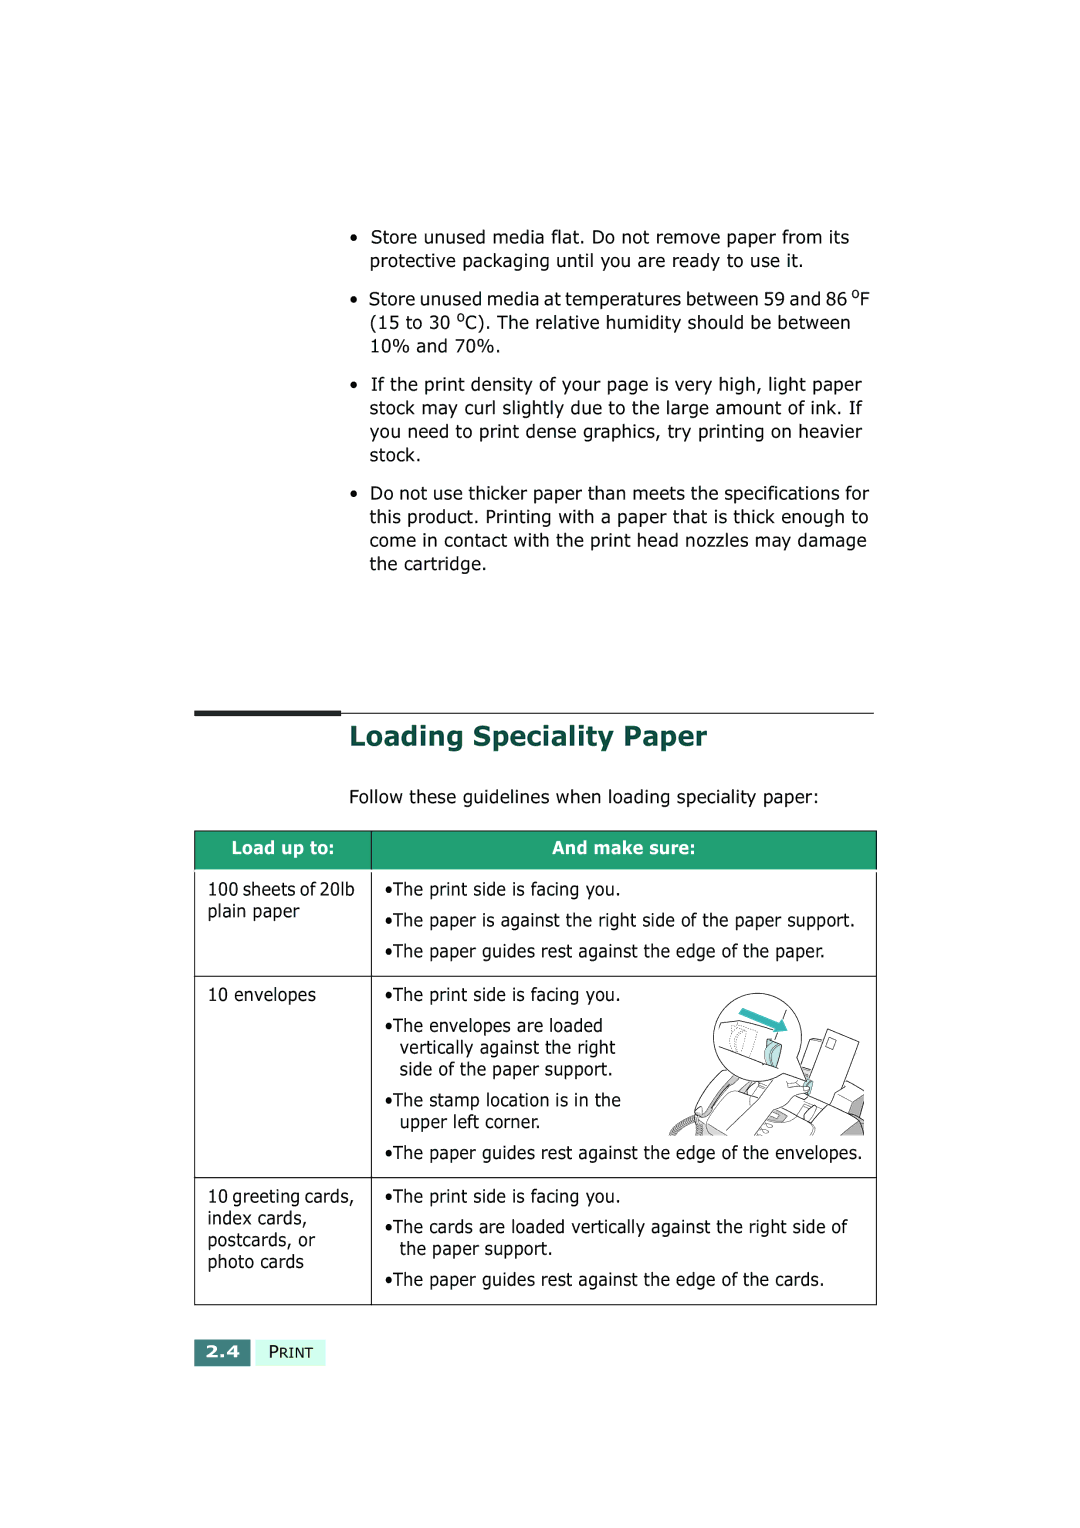 Samsung SF-430 manual Loading Speciality Paper 